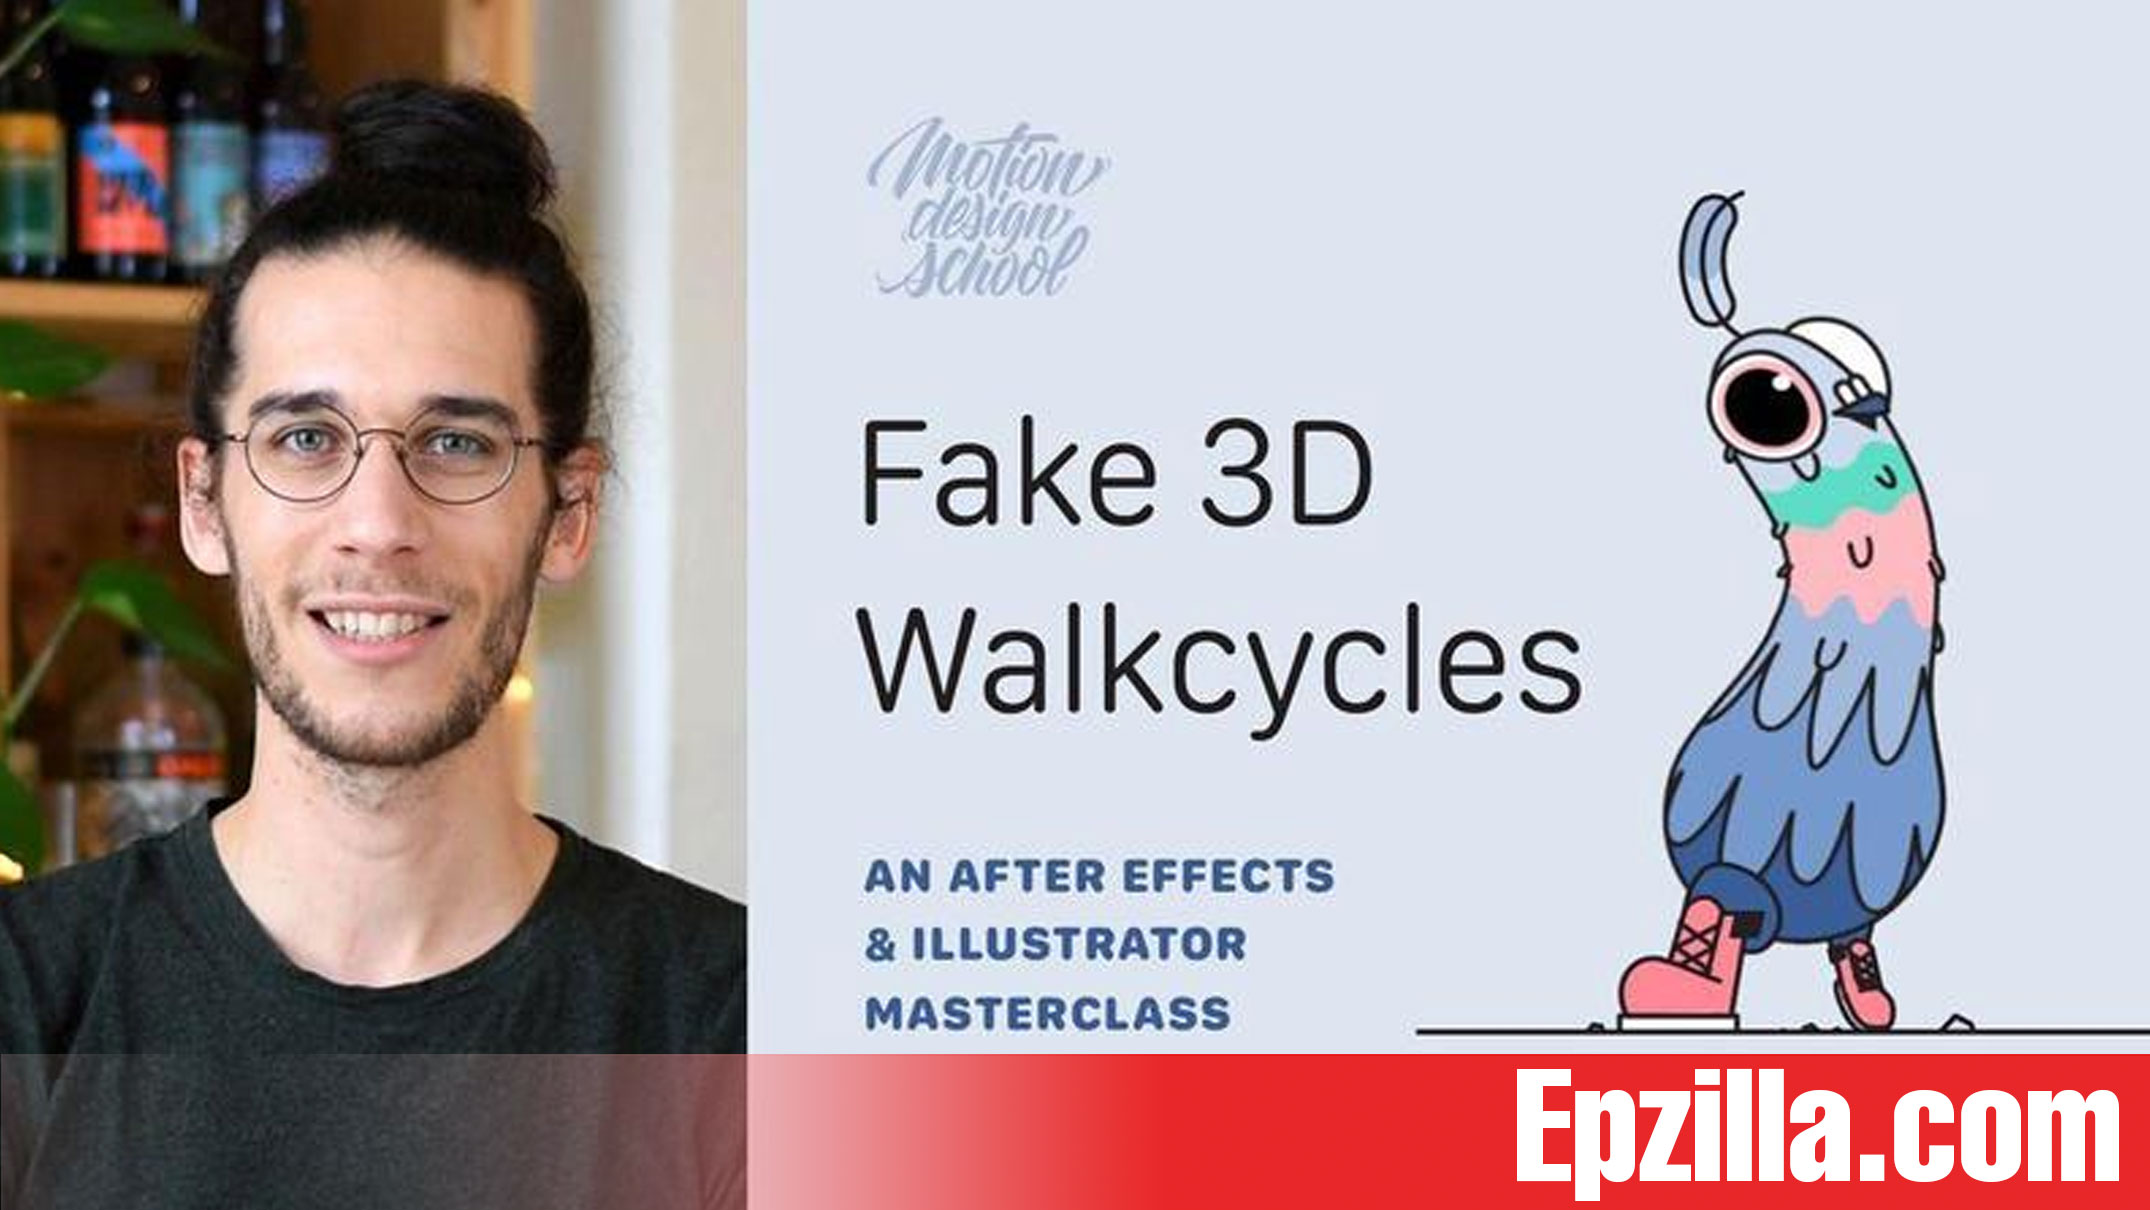 Motion Design School Fake 3D Walkcycles in After Effects Free Download Epzilla.com